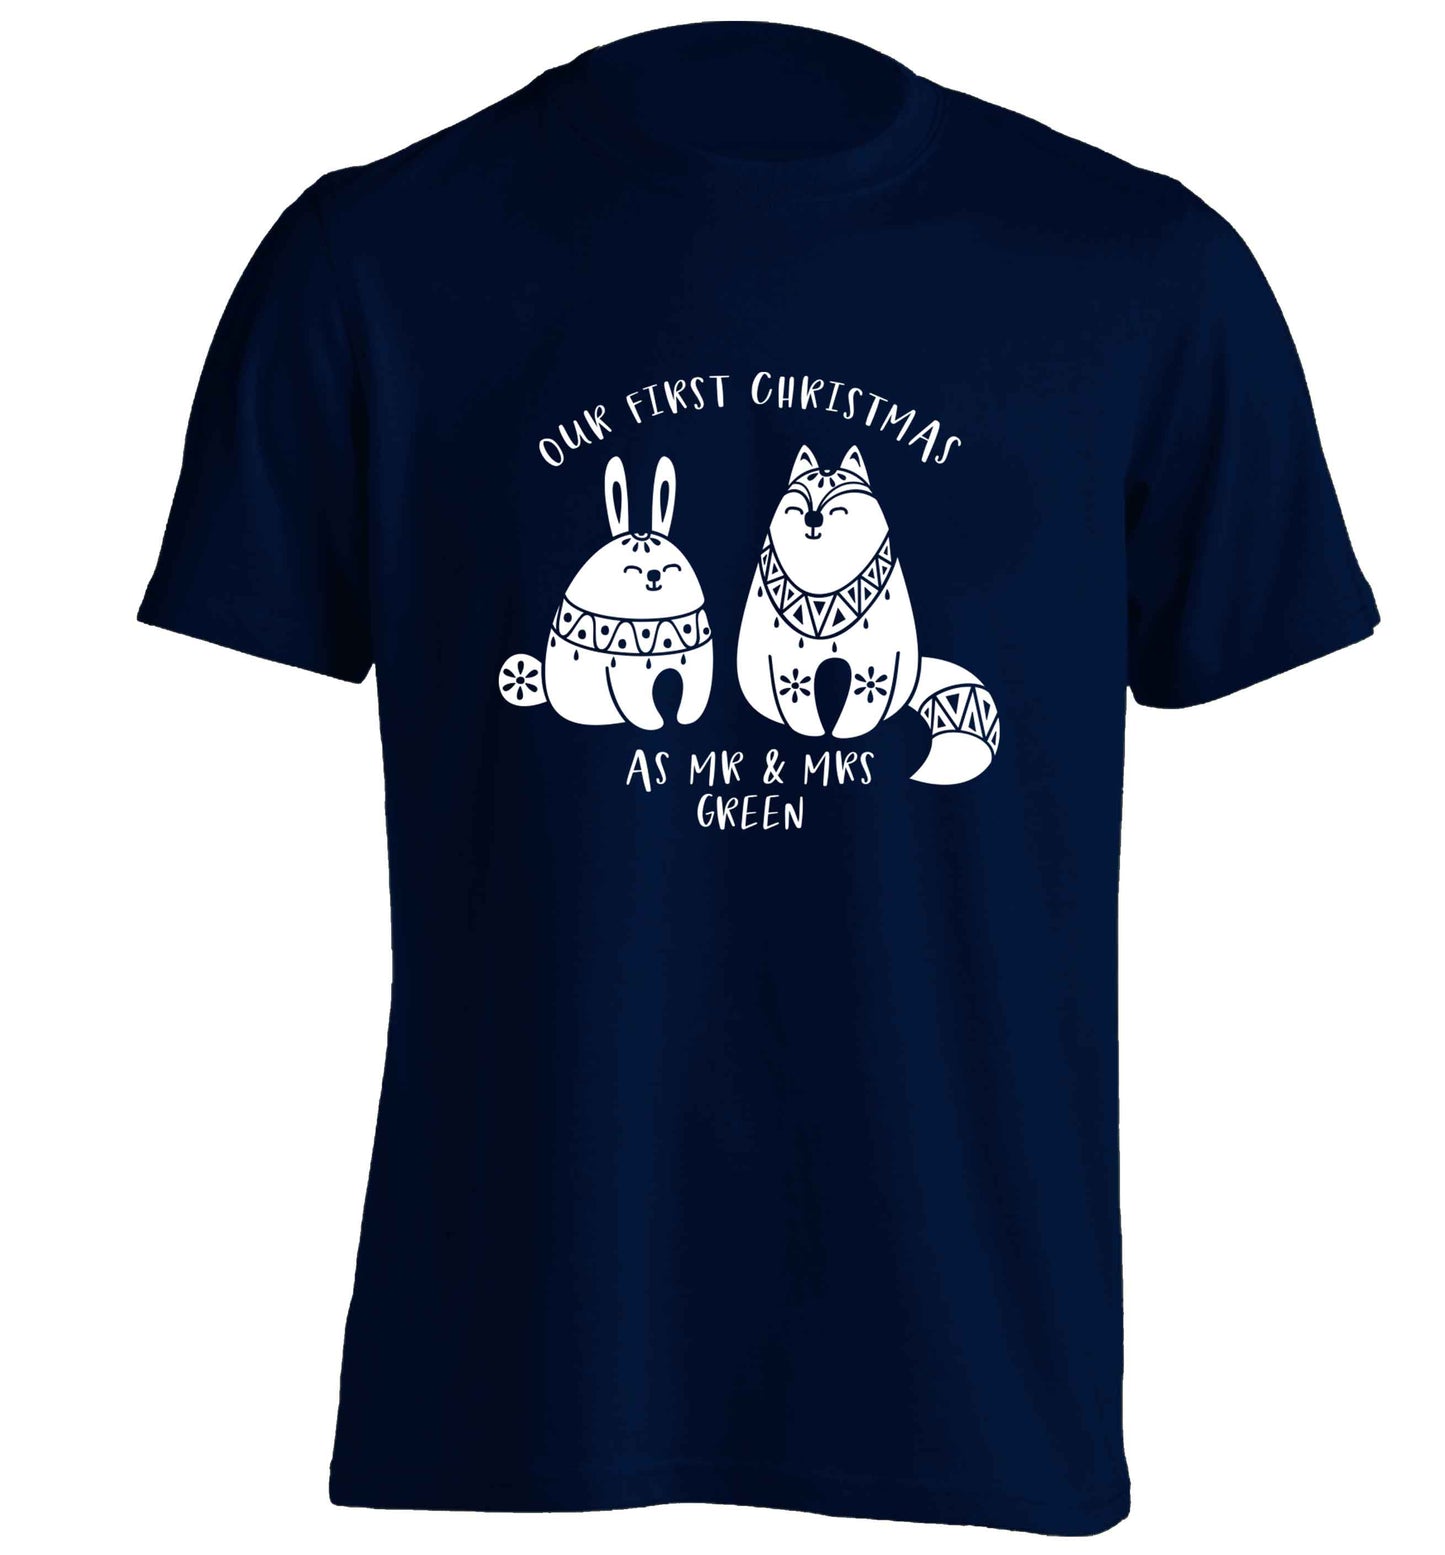 Our first Christmas as Mr & Mrs personalised adults unisex navy Tshirt 2XL